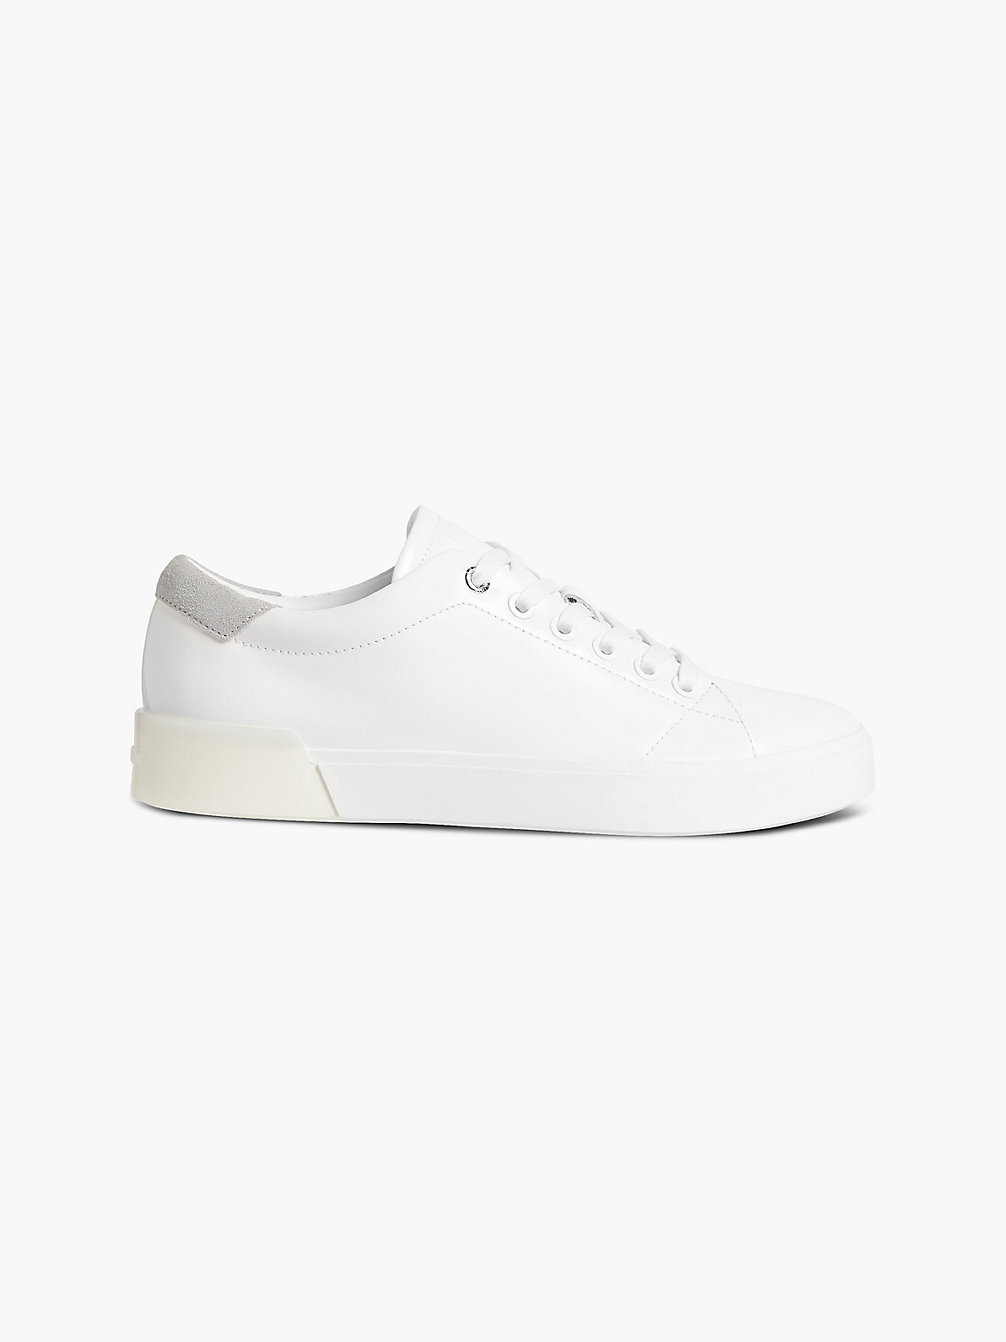 CK WHITE Leather Trainers undefined women Calvin Klein